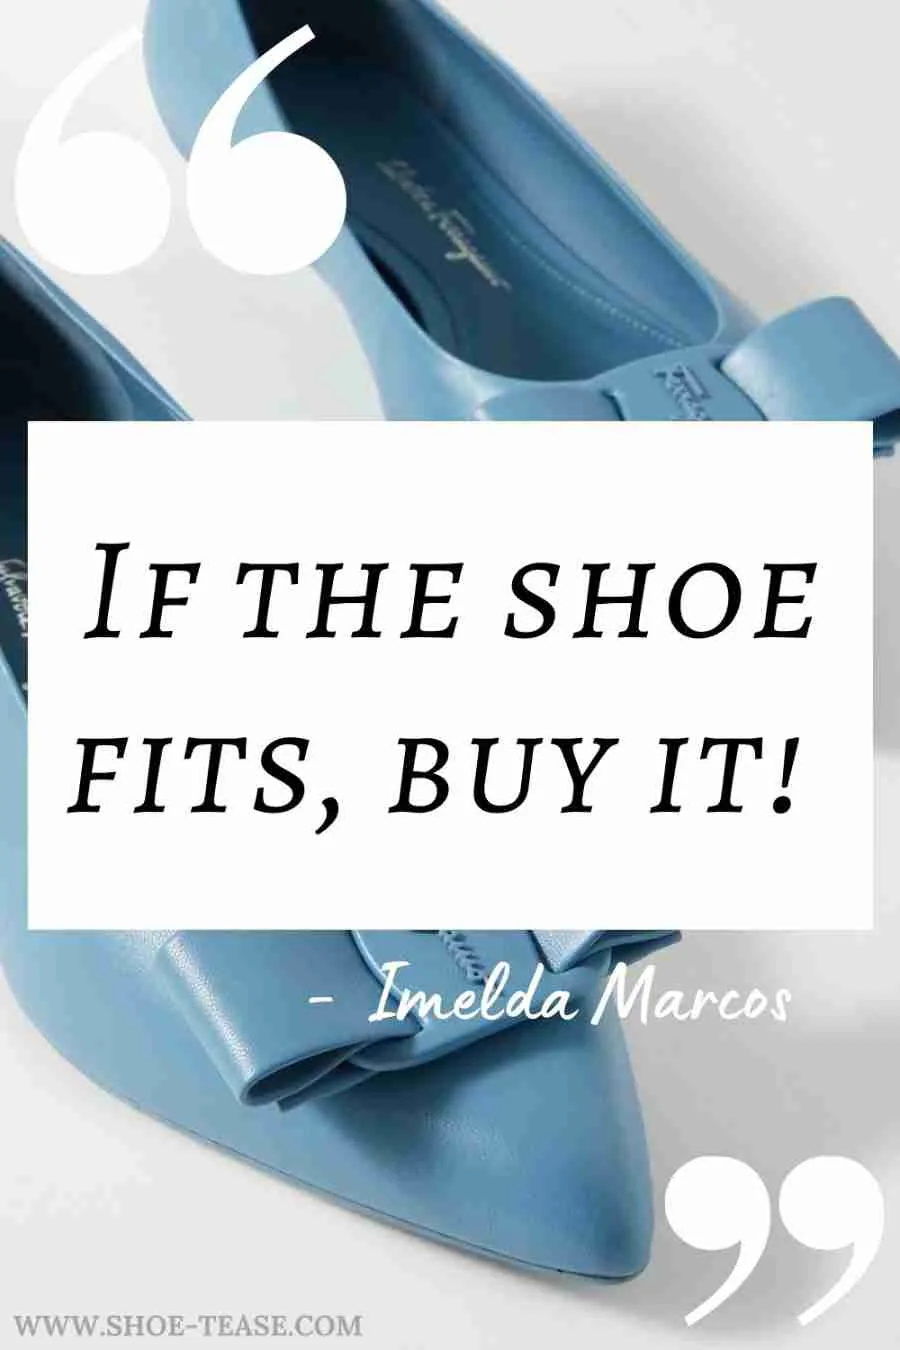 Shoe Quote text: if the shoe fits, buy it! Imelda Marcus, over photo of blue bow shoes.